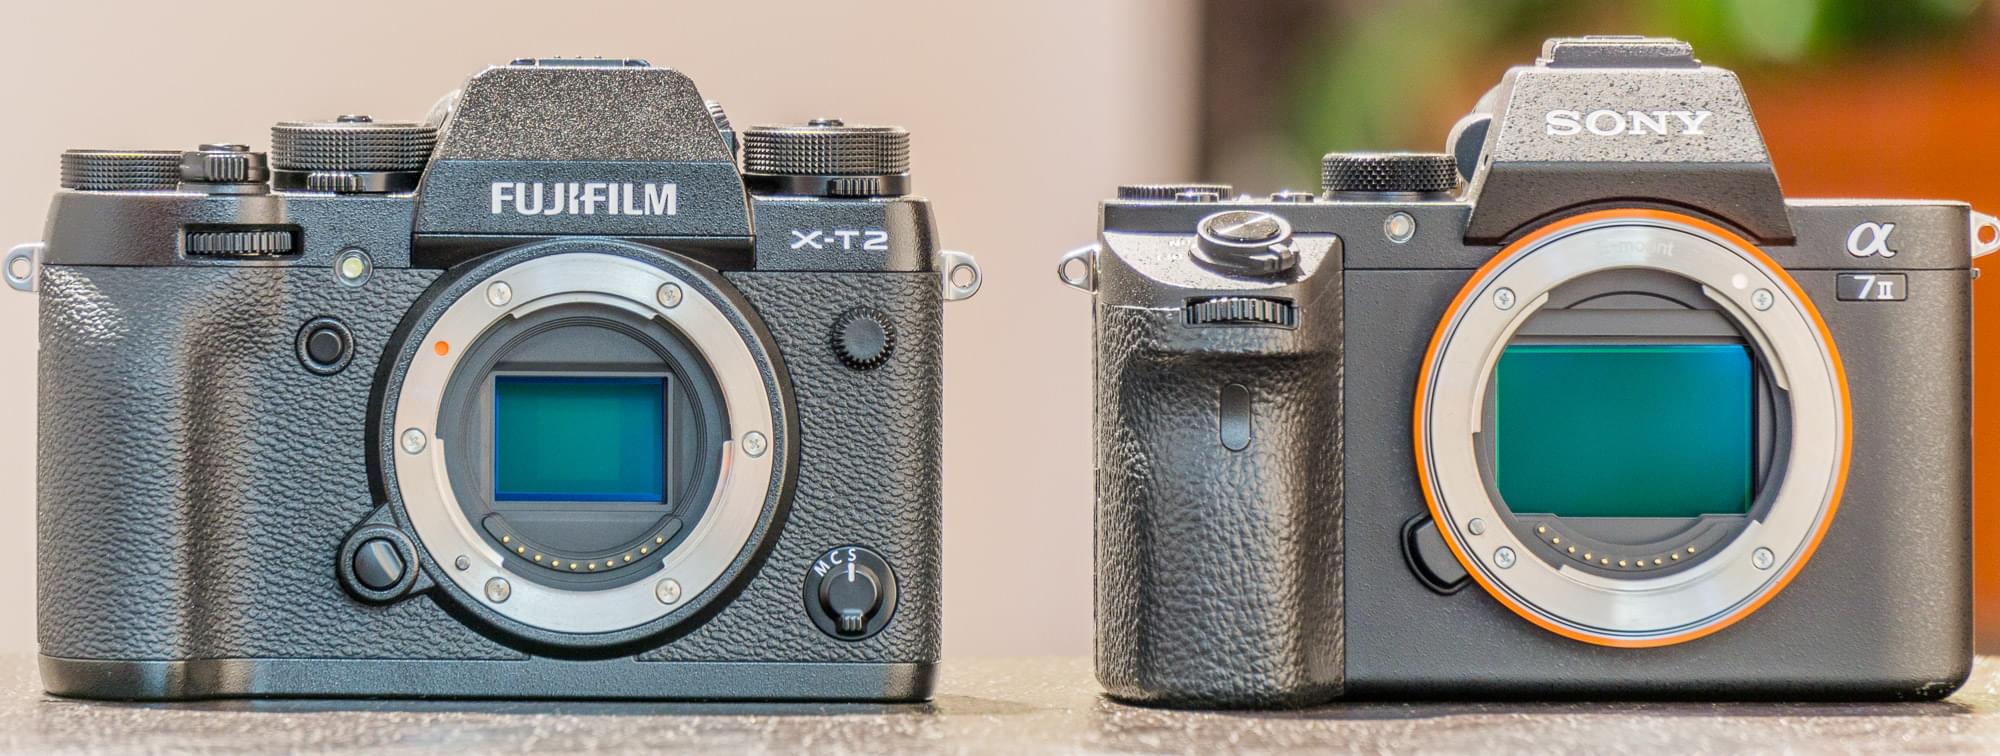 Two cameras side by side, a Fujifilm X-T2 and a Sony a7 mark 2, with their lenses removed exposing the image sensor of each camera.